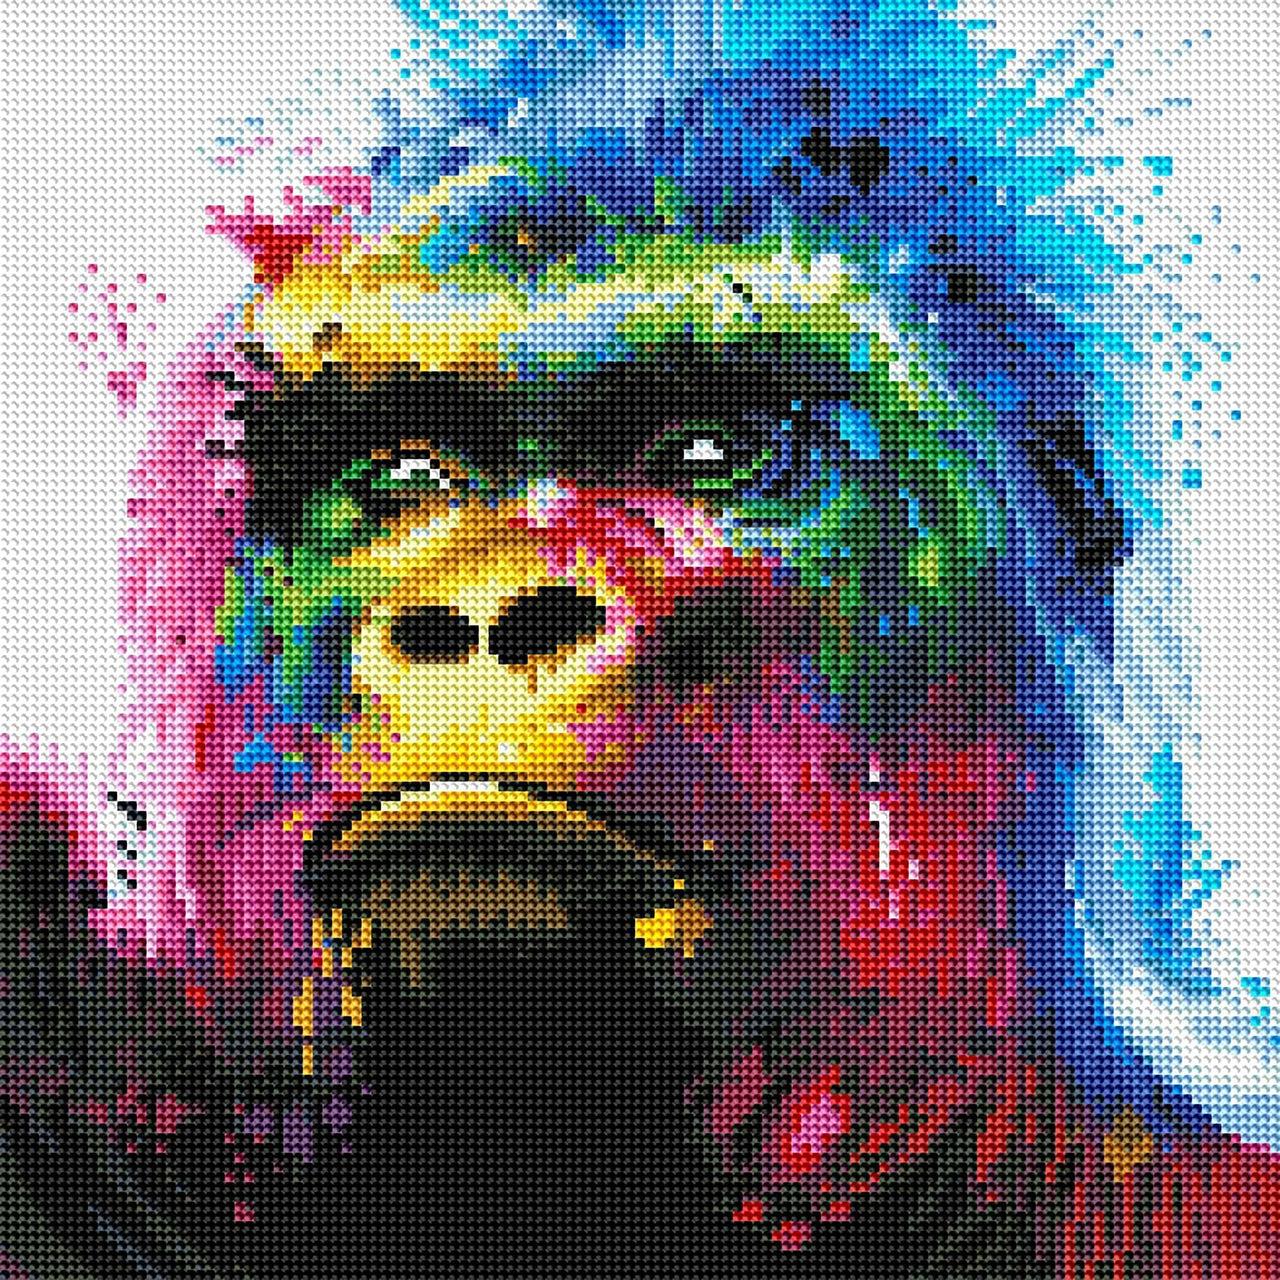 Diamond Painting Gorilla Round With 37 Colors Including 2 ABs / 14.6" x 14.6" (37cm x 37cm) / 17,161